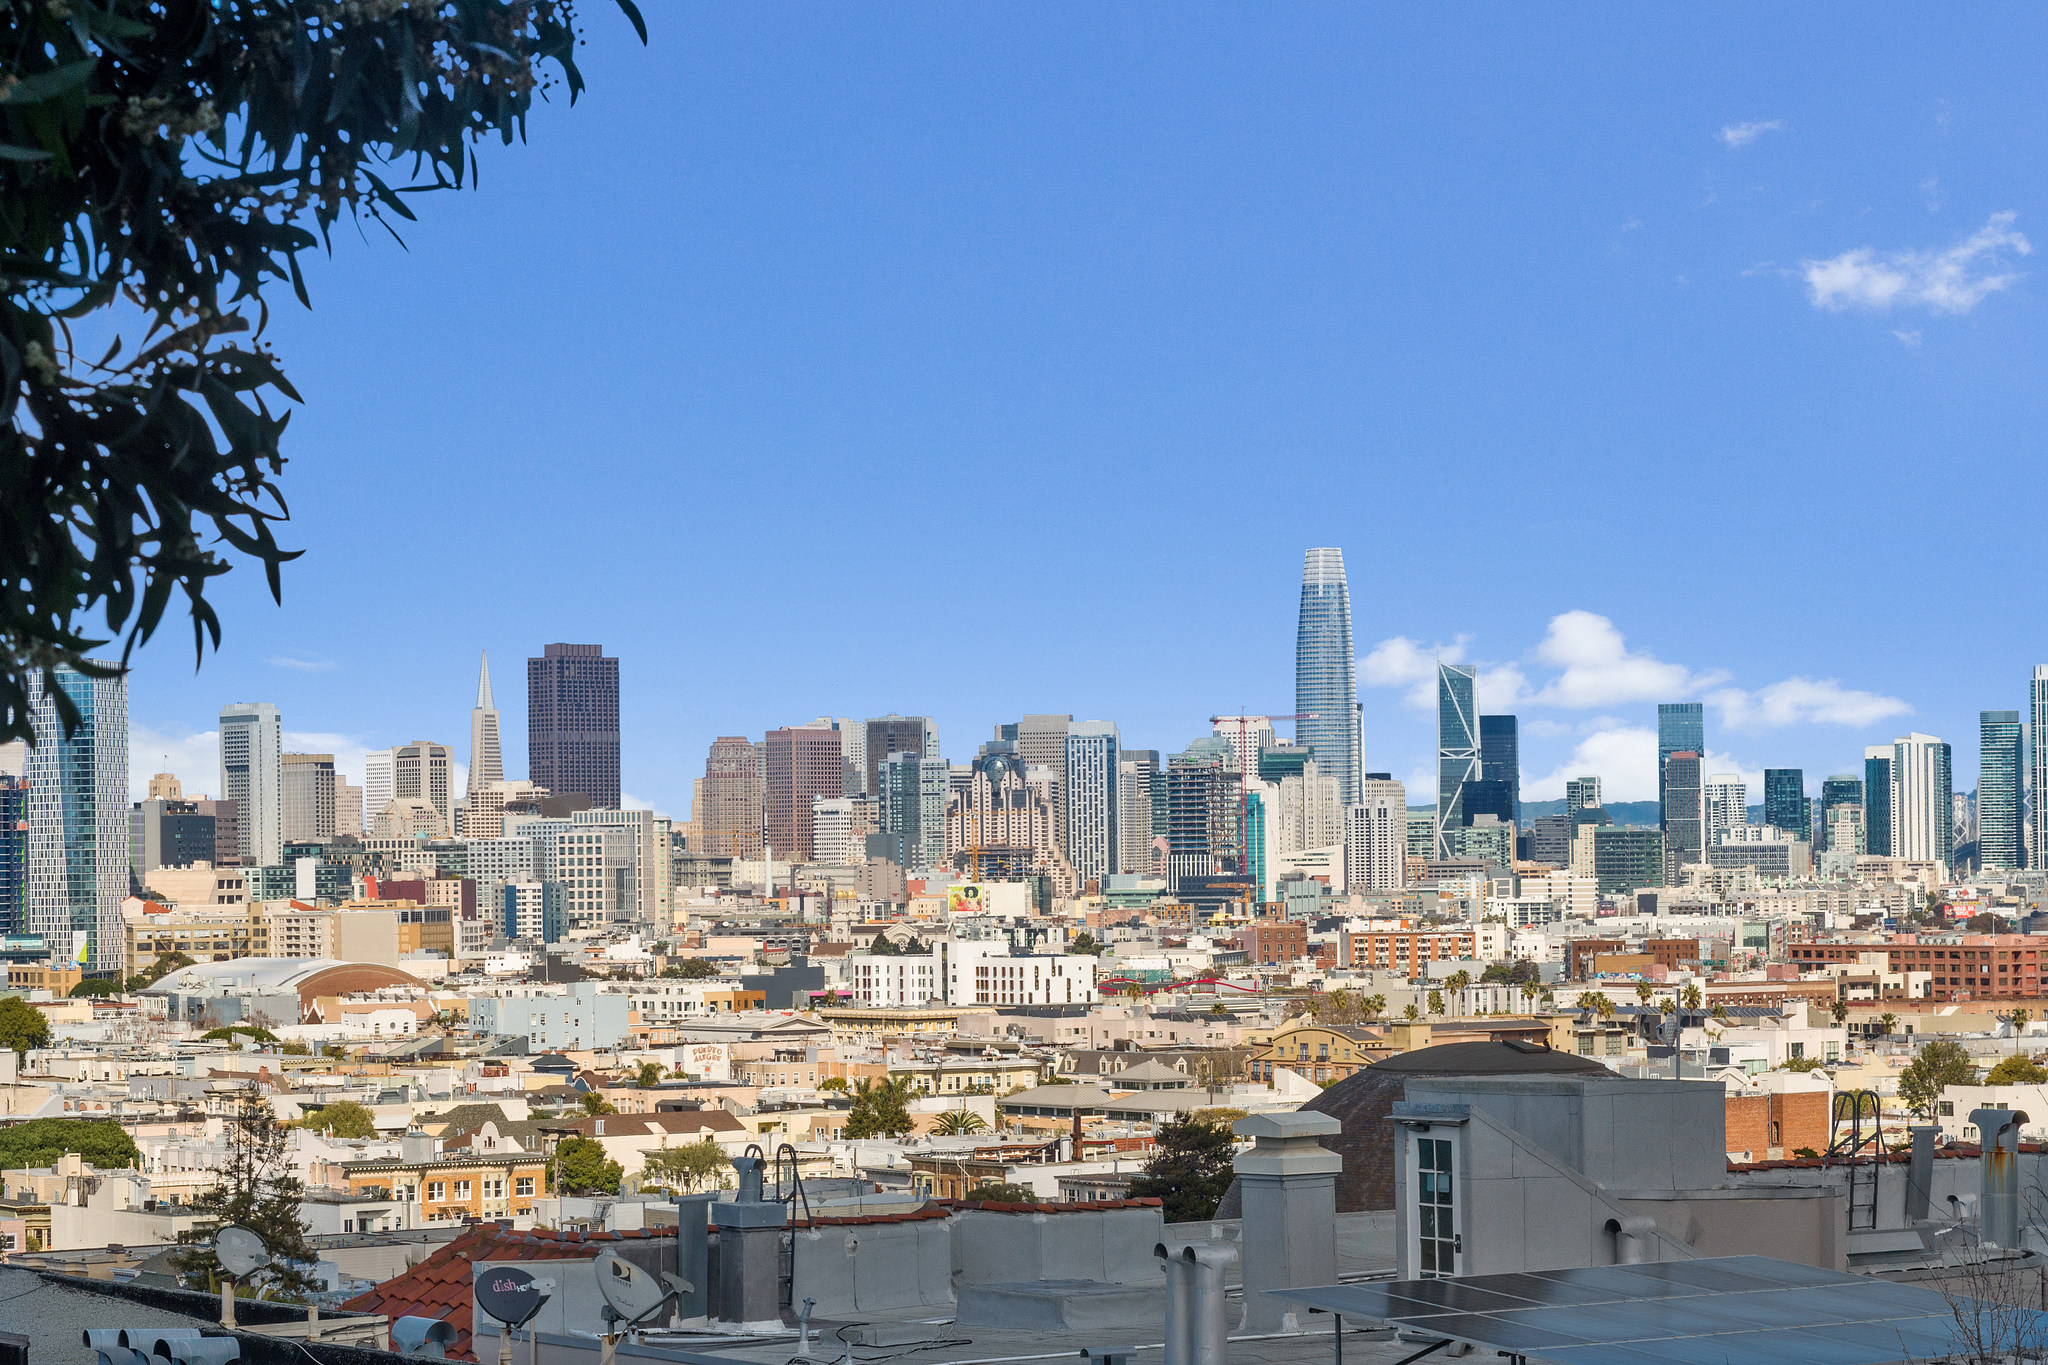 Property Photo: City-scape of down town San Francisco as seen from 228 Liberty Street